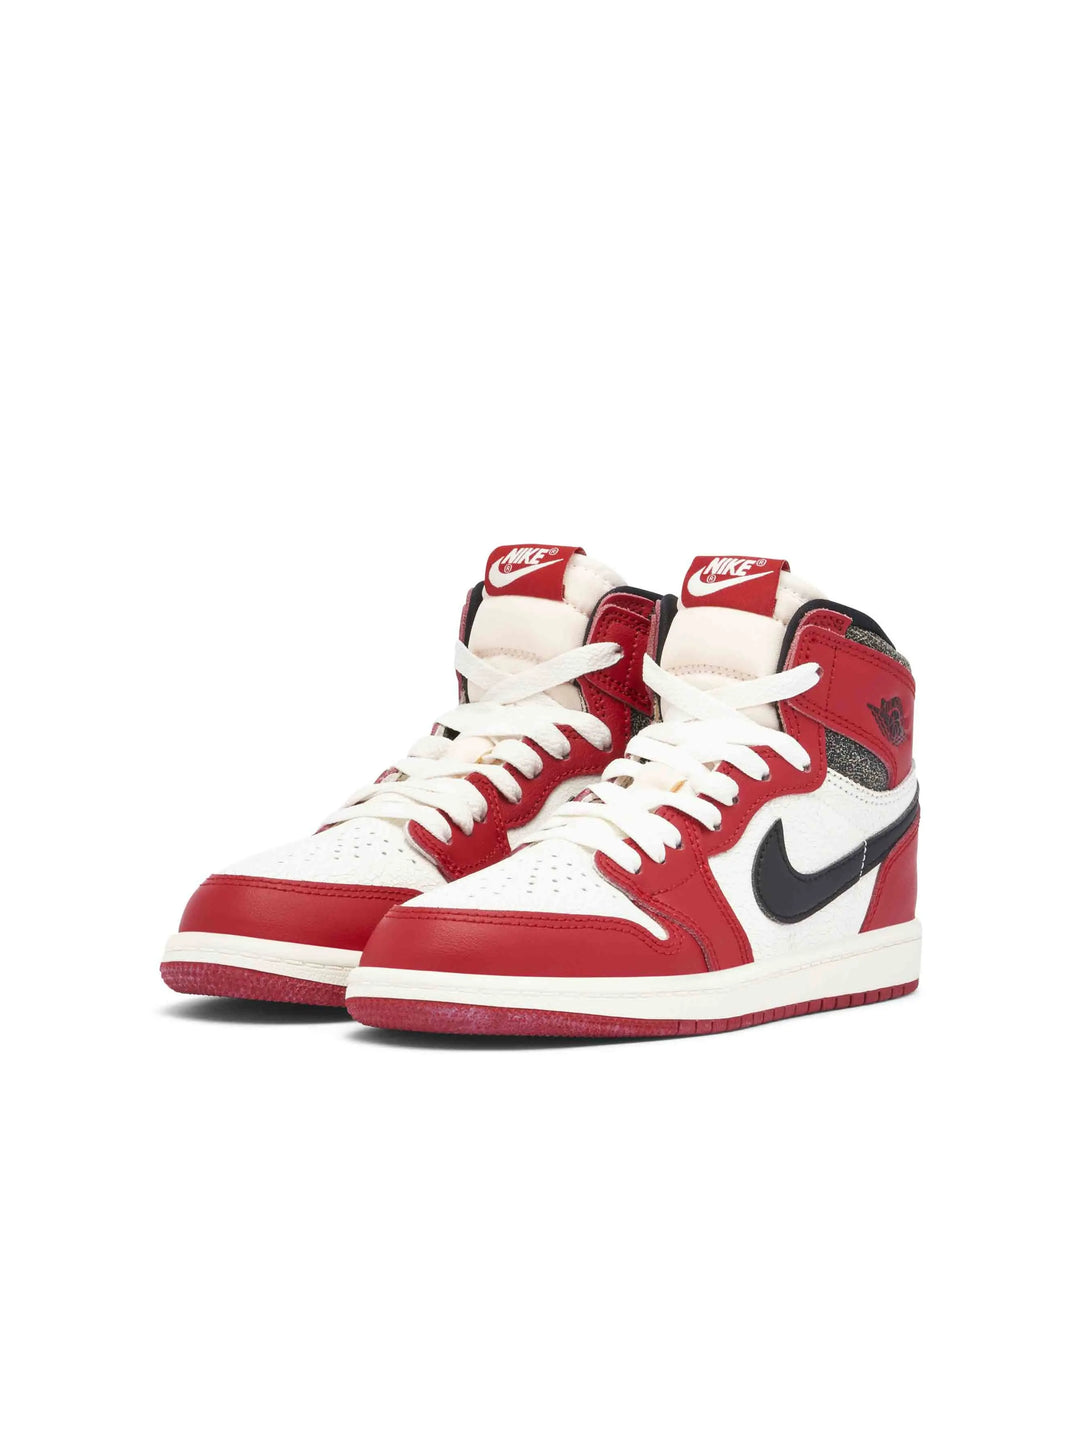 Nike Air Jordan 1 Retro High OG Chicago Lost and Found (PS) Prior